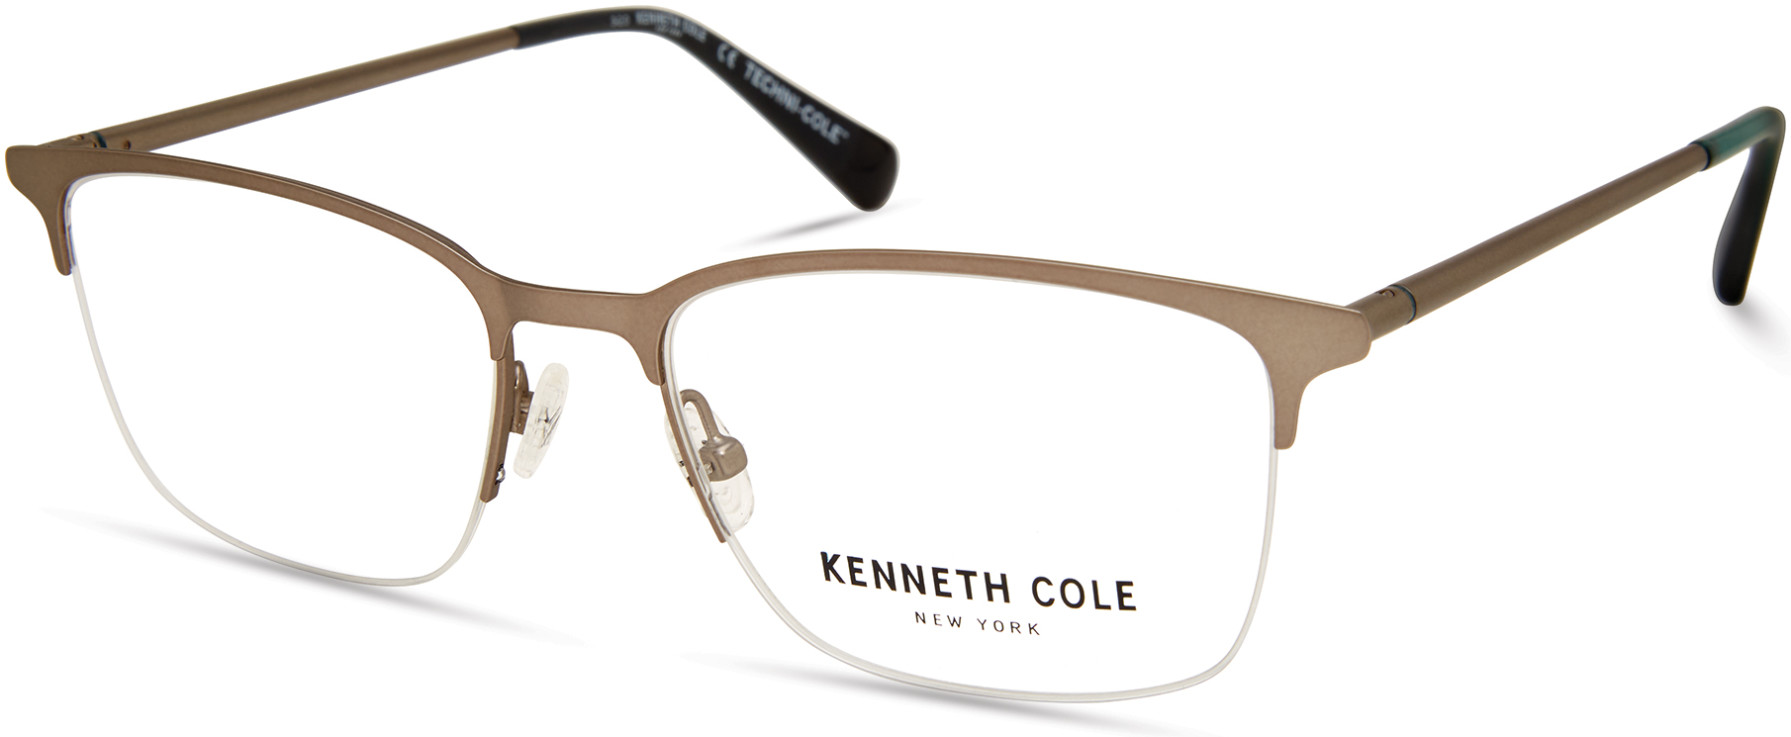 KENNETH COLE NY 0322 009